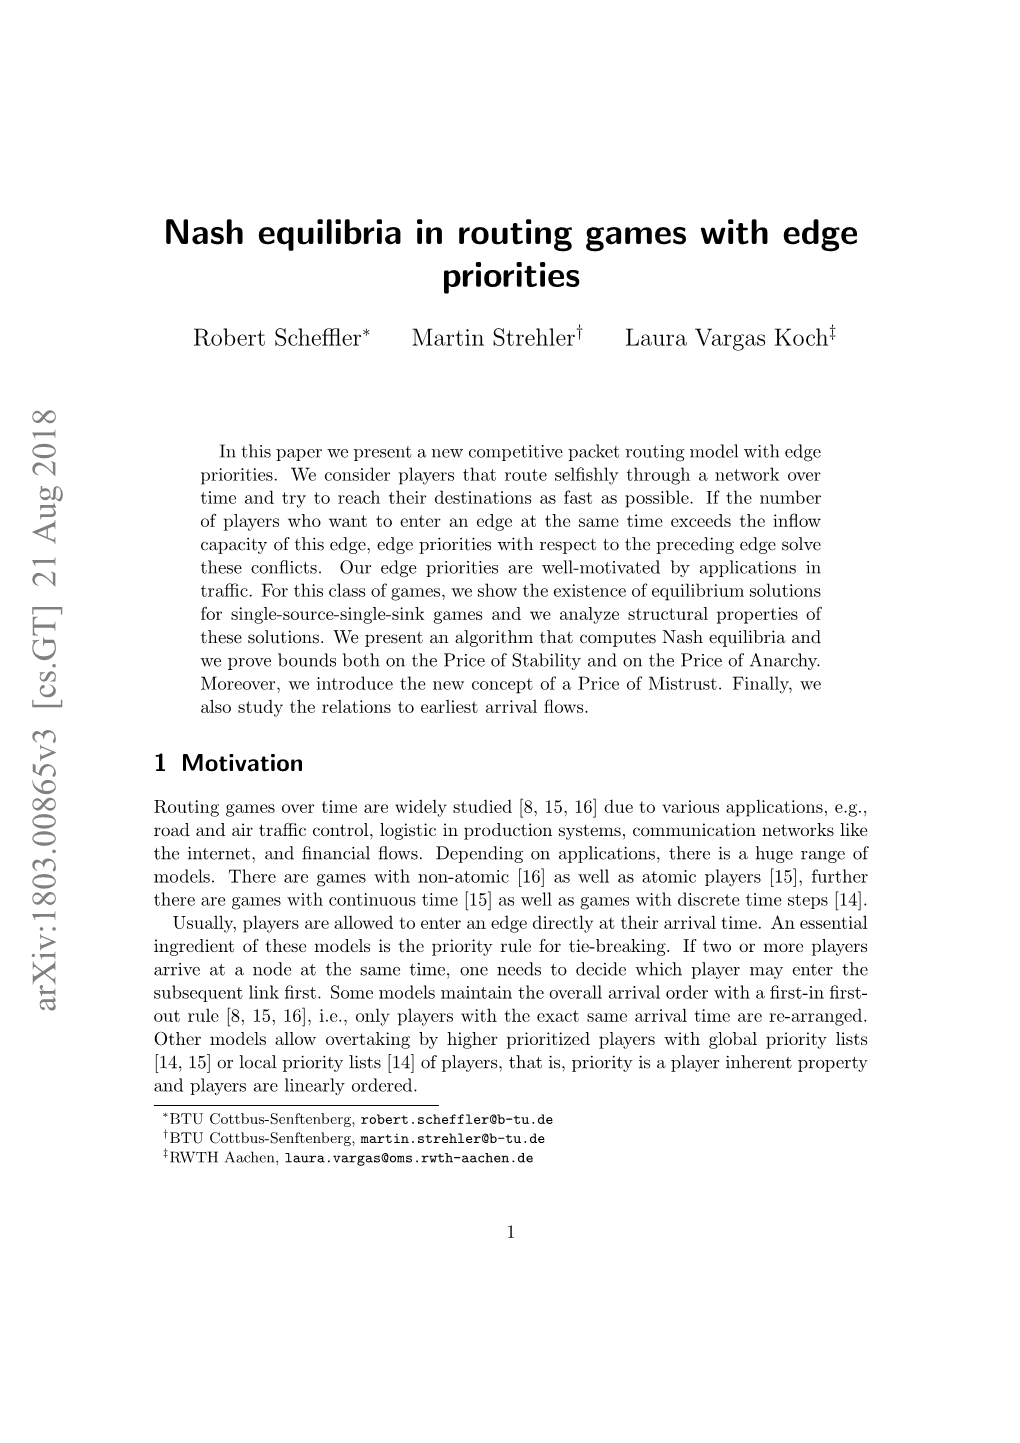 Nash Equilibria in Routing Games with Edge Priorities